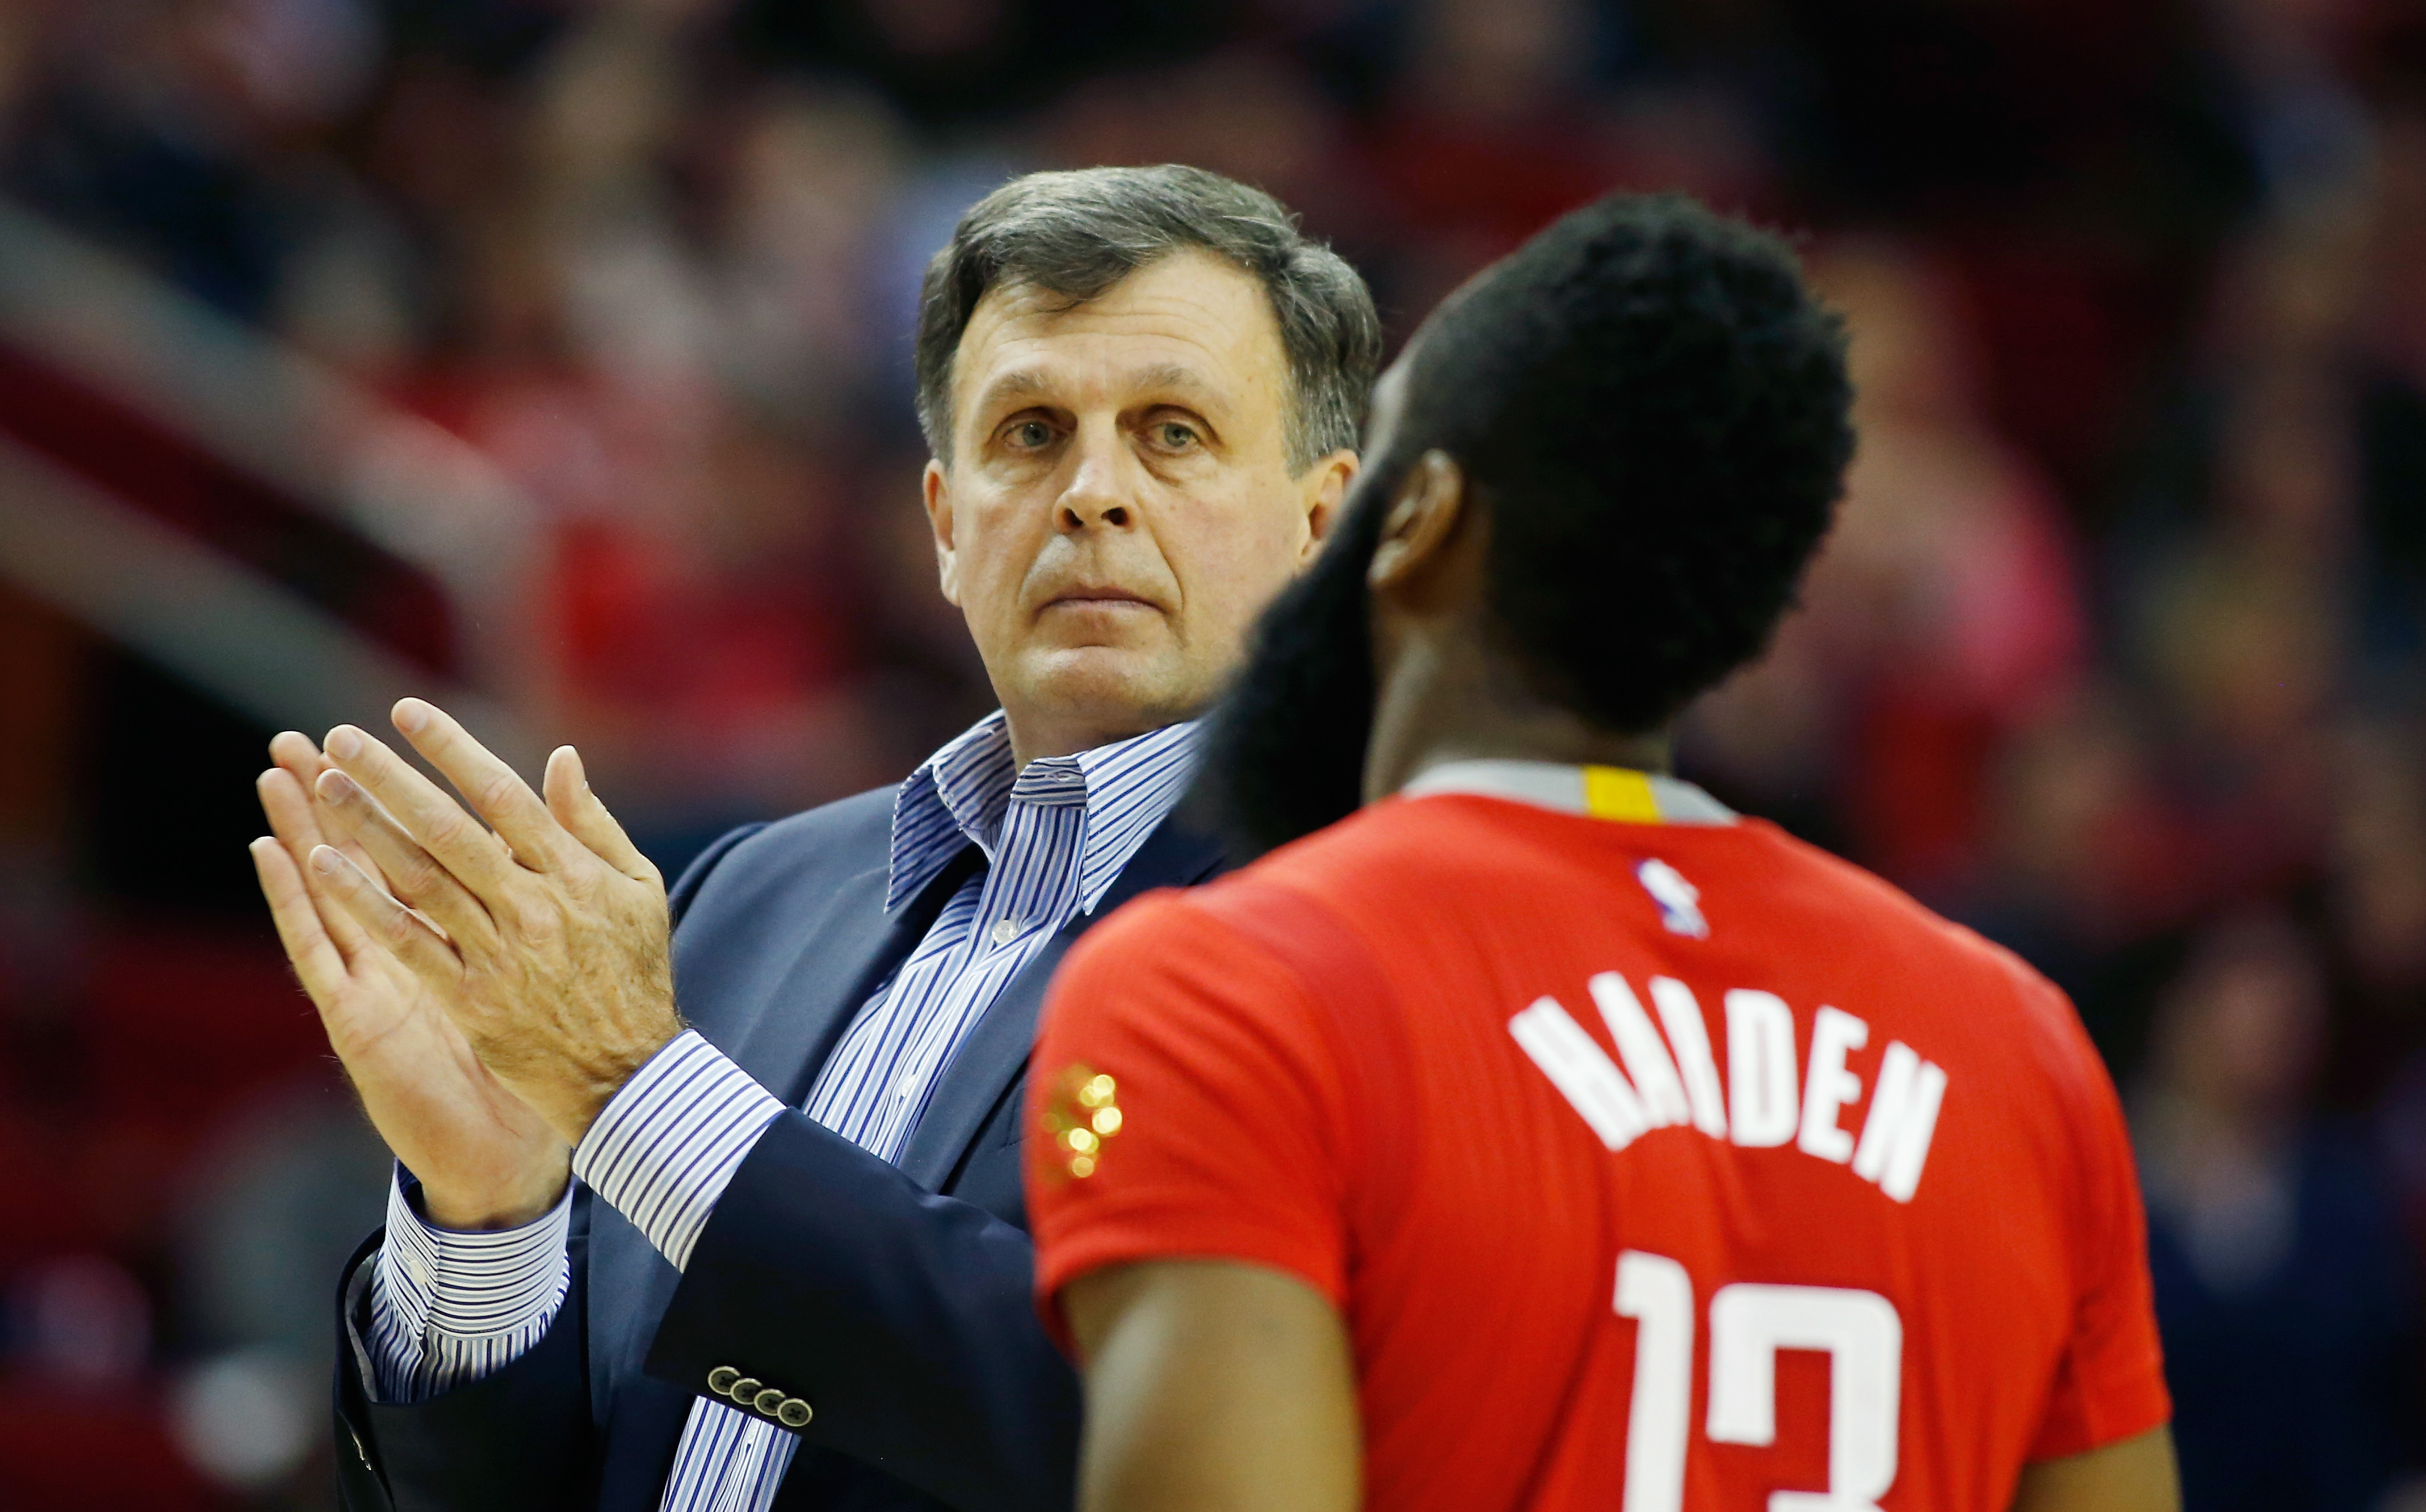 James Harden of the Houston Rockets is greeted by his head coach Kevin McHale.